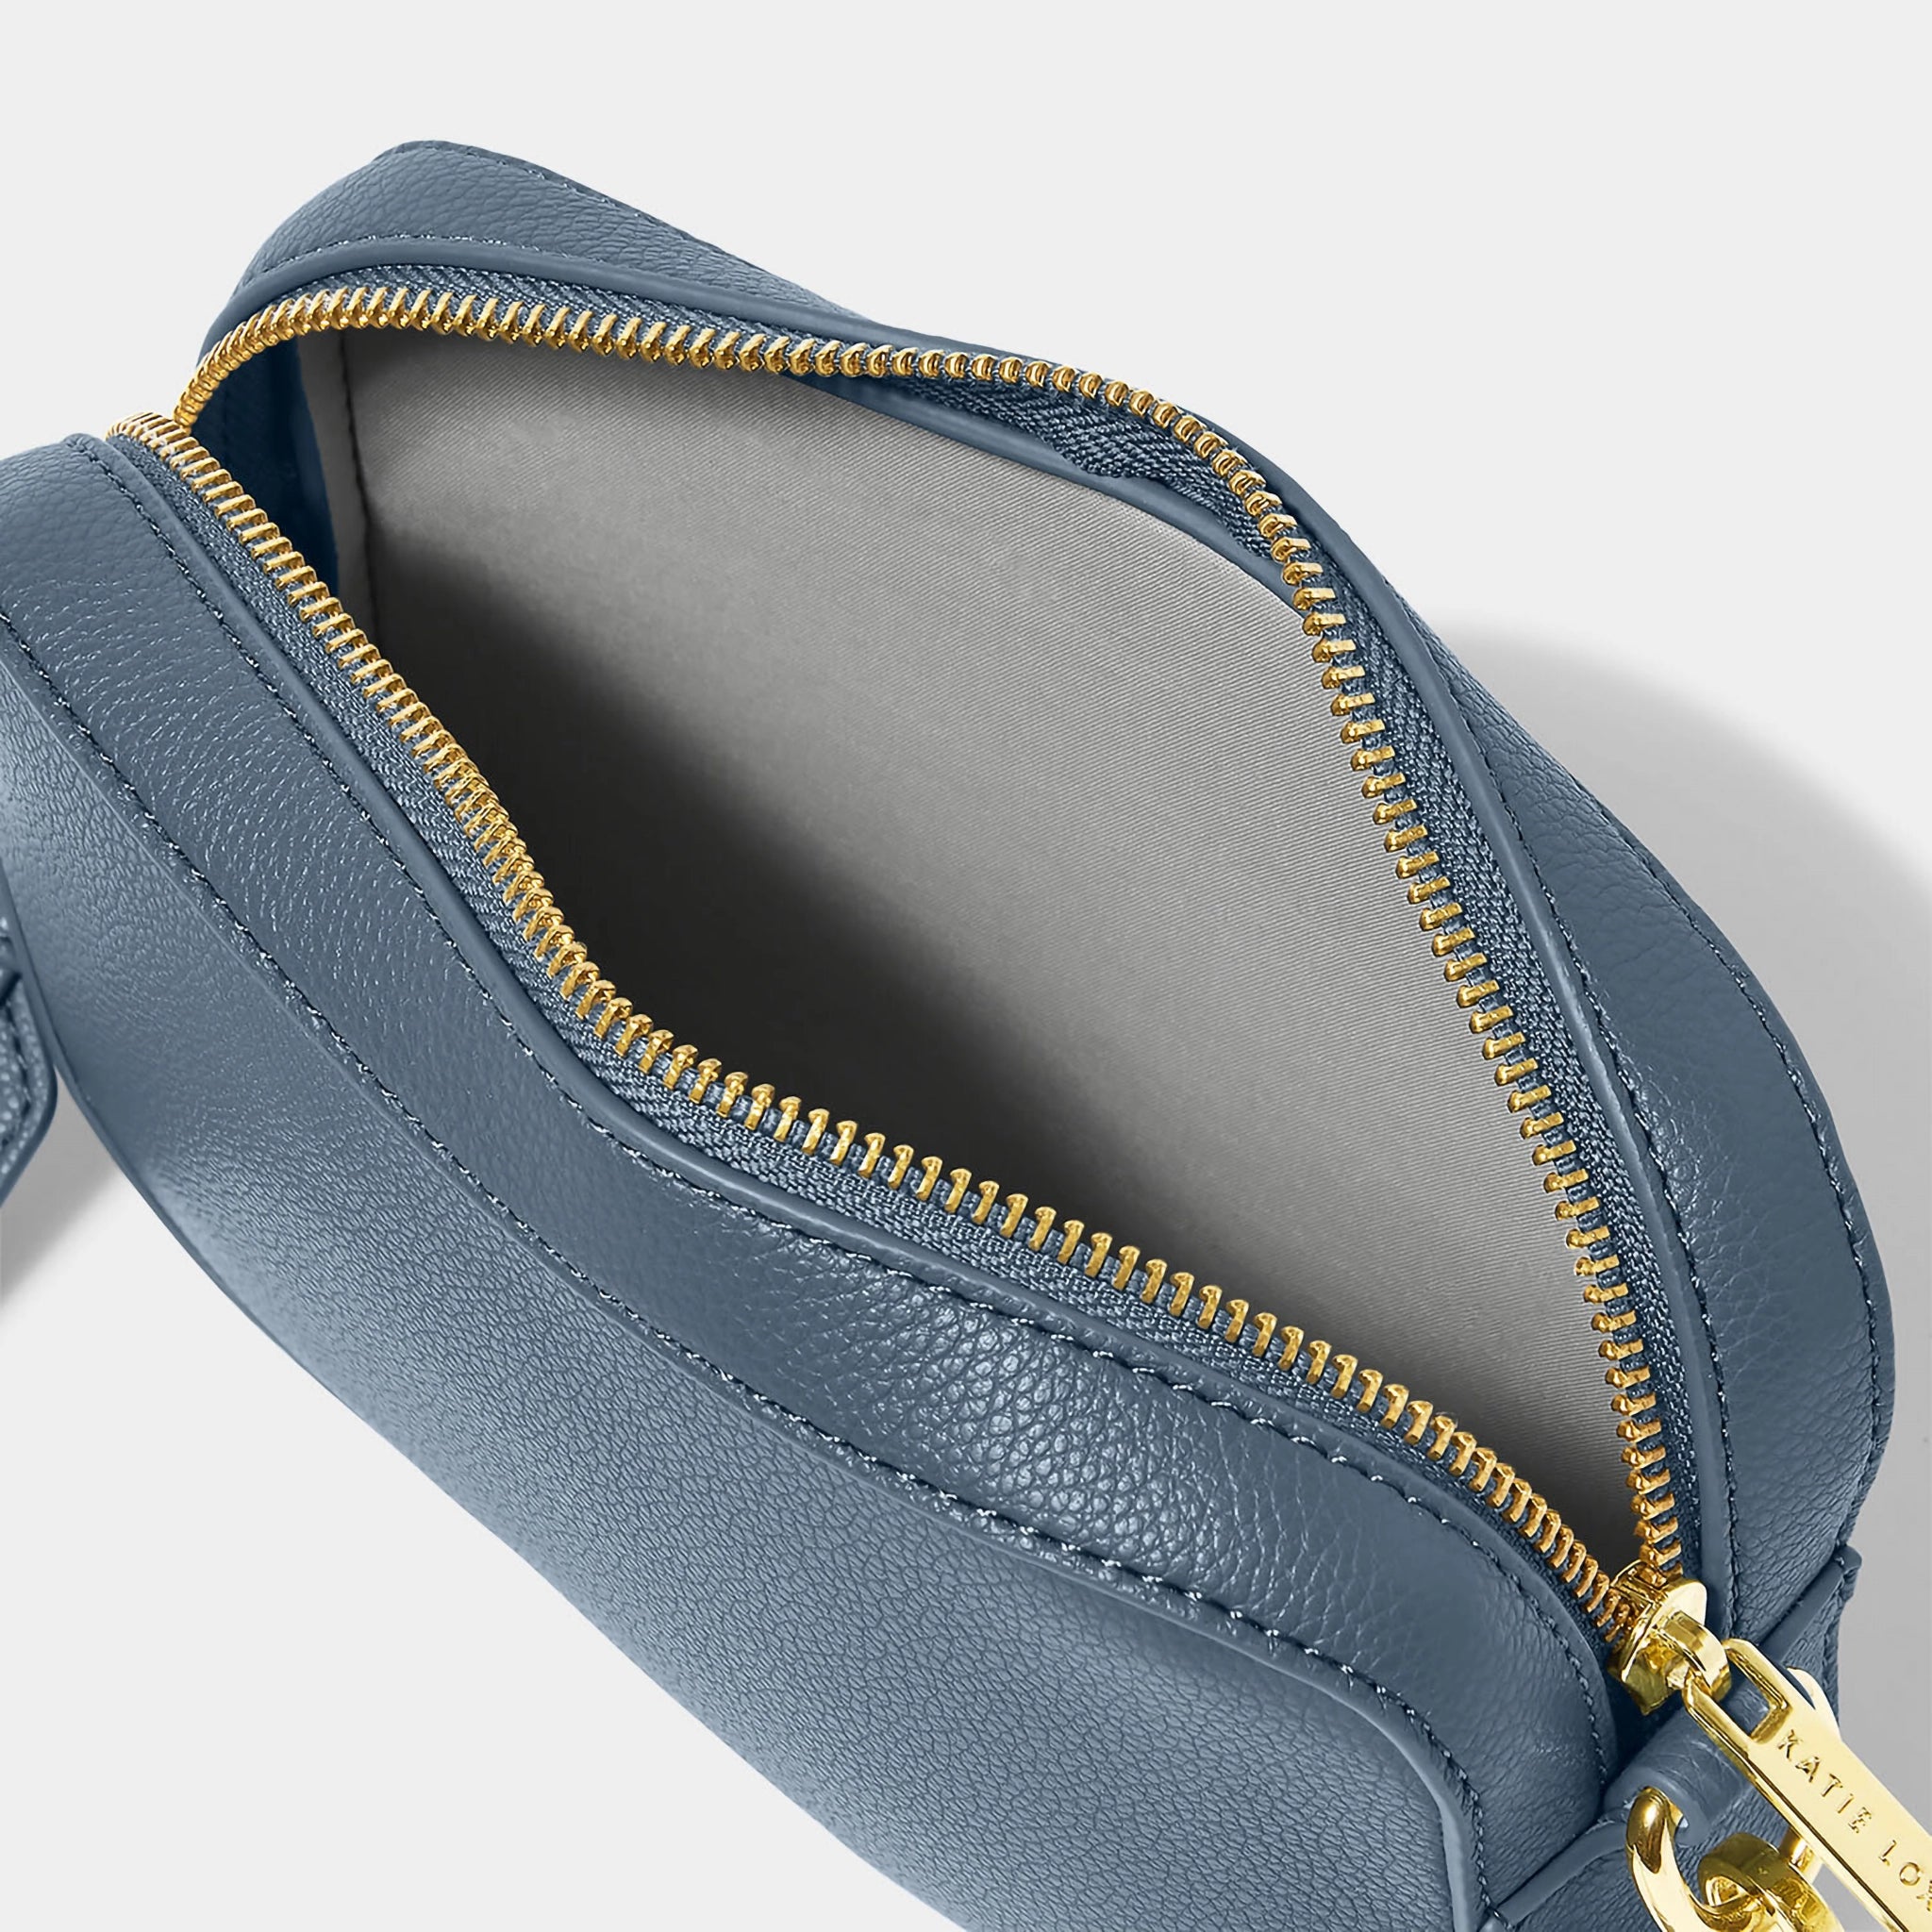 A navy blue crossbody bag in a simple box shape with adjustable canvas strap and gold hardware open